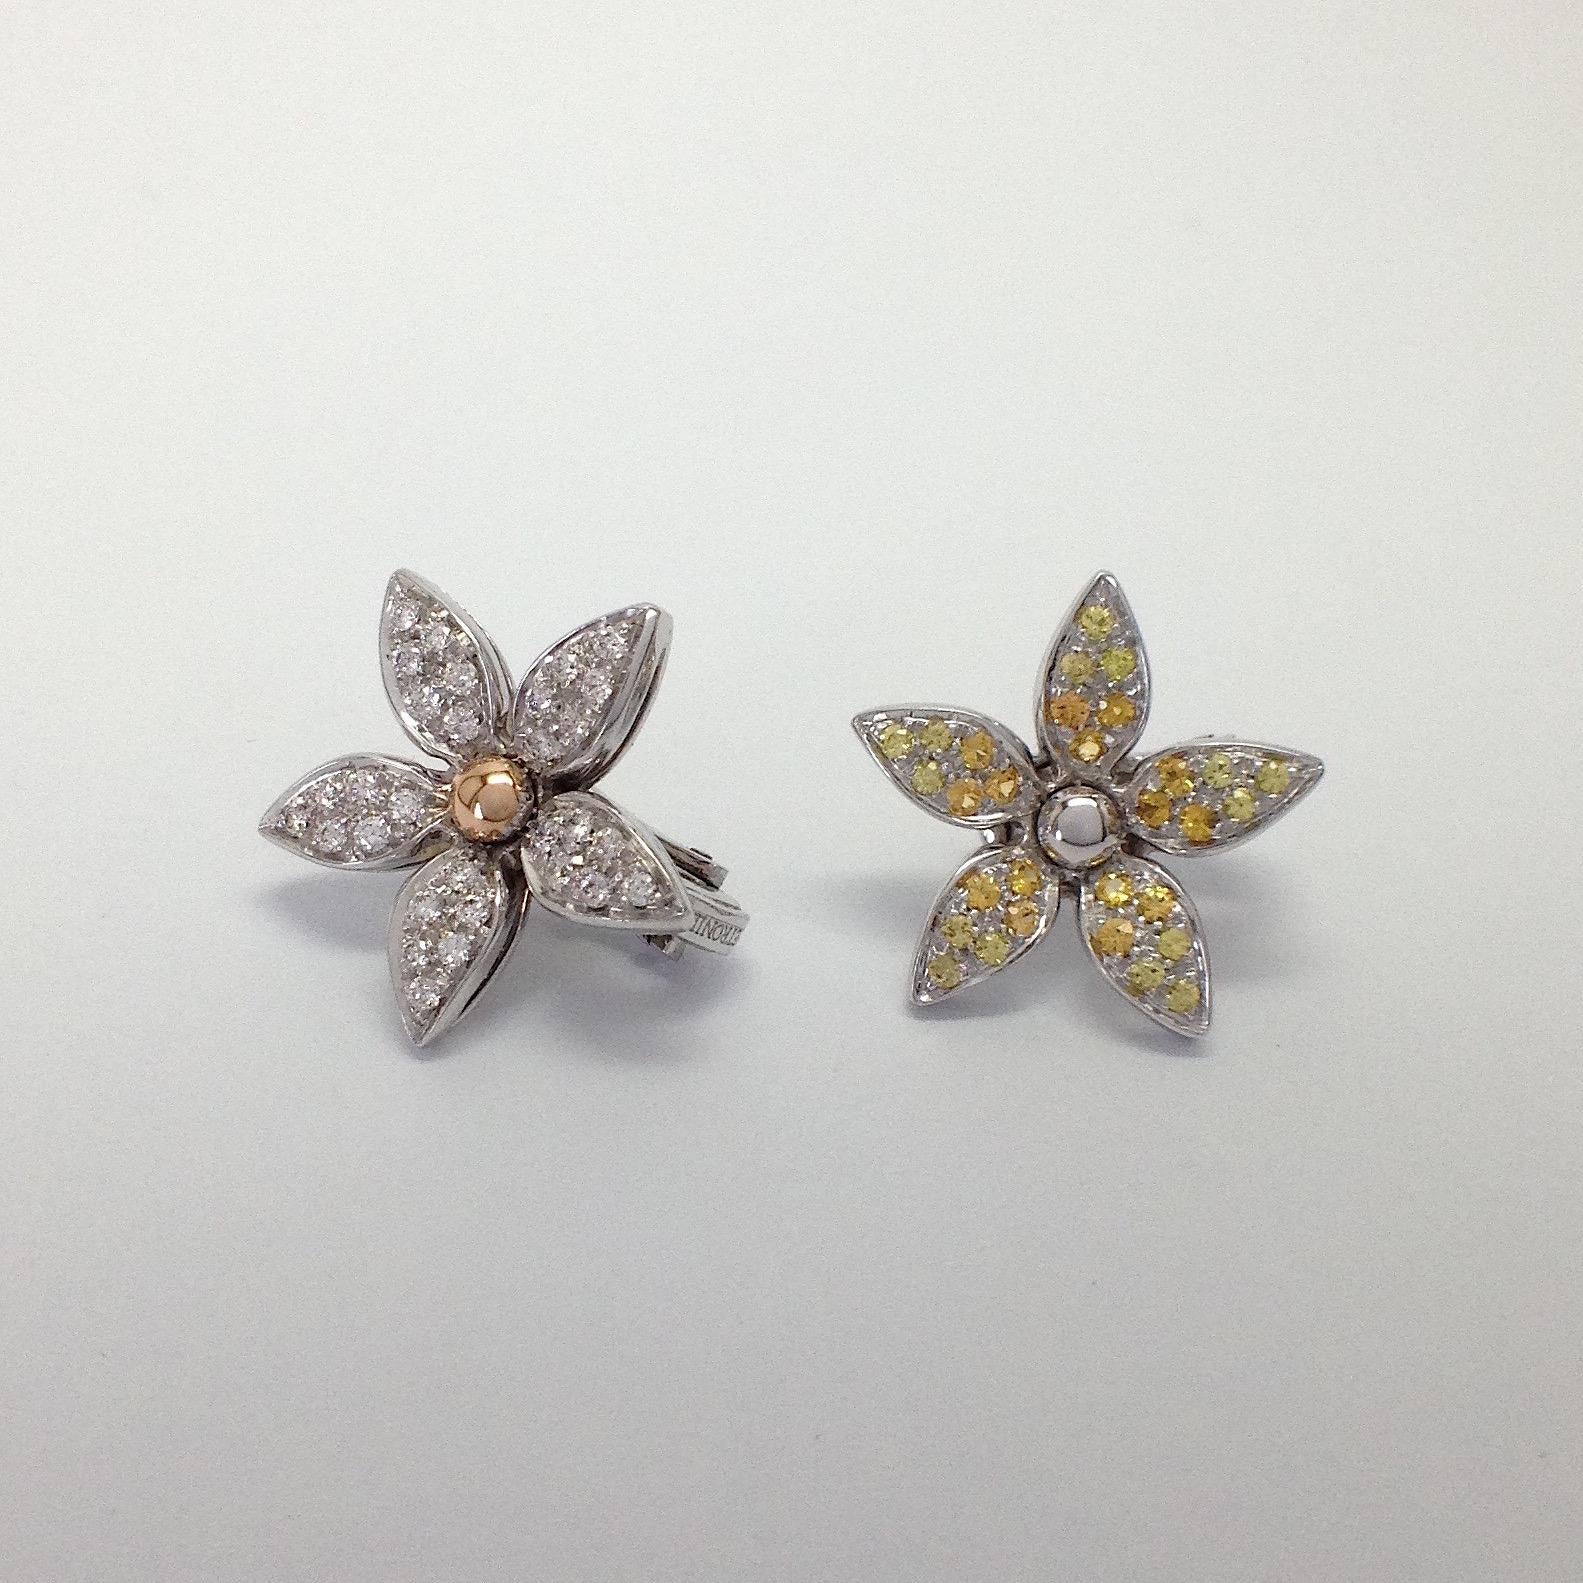 White Diamond Yellow Sapphire 18 Karat Gold Flower Stud Earrings Made in Italy
Inspired by clematis flowers, I made this pair of white gold earrings. An earring has petals set with diamonds and pistil and rose gold. The other has the petals set with